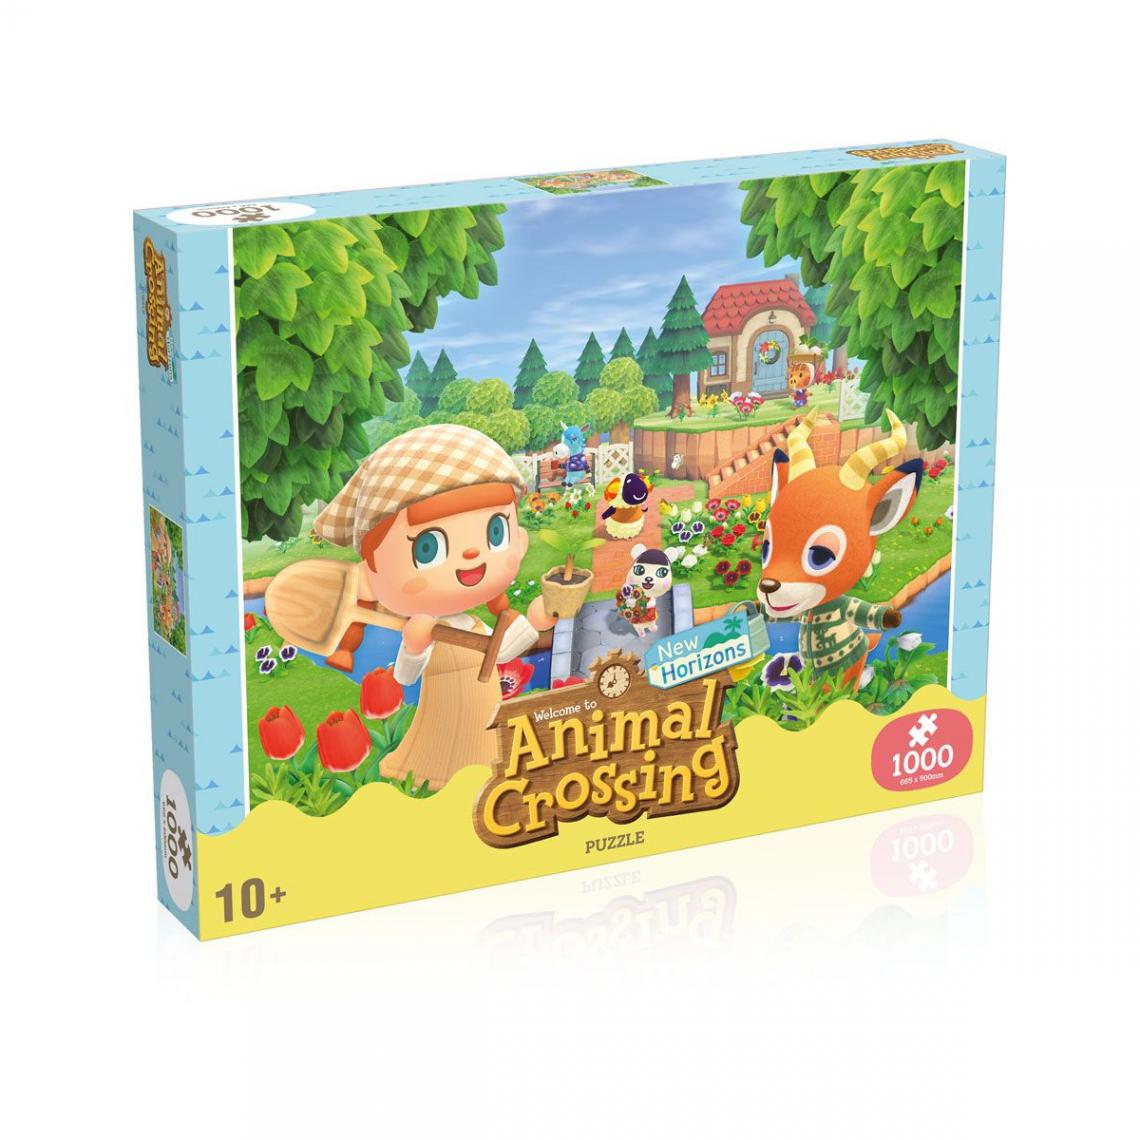 Winning Moves - ANIMAL CROSSING Puzzle 1000 pièces - Puzzles 3D